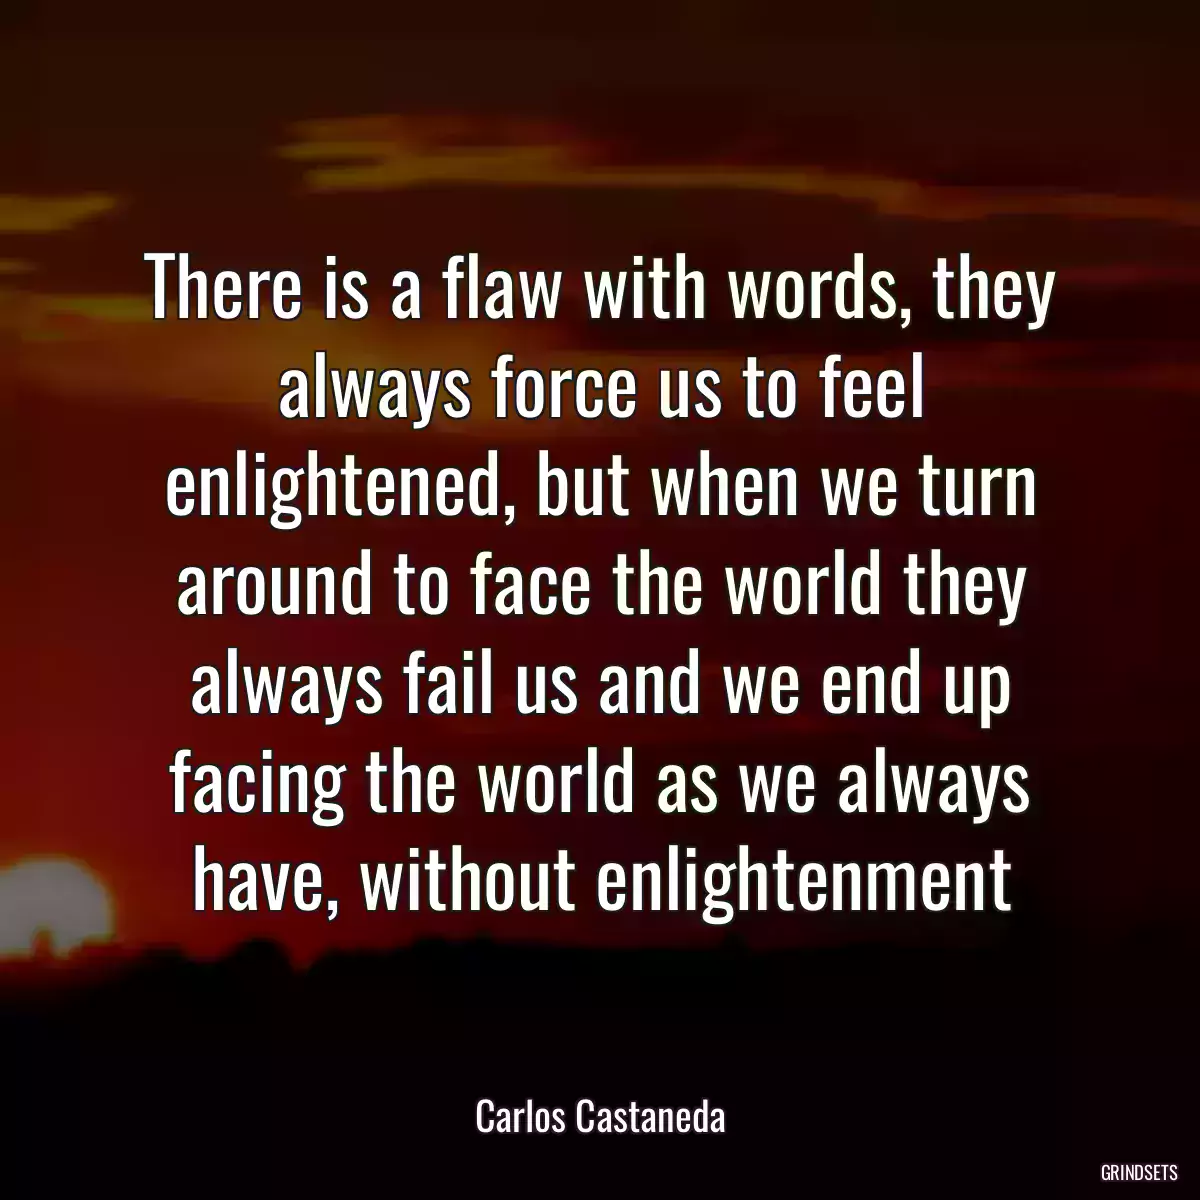 There is a flaw with words, they always force us to feel enlightened, but when we turn around to face the world they always fail us and we end up facing the world as we always have, without enlightenment